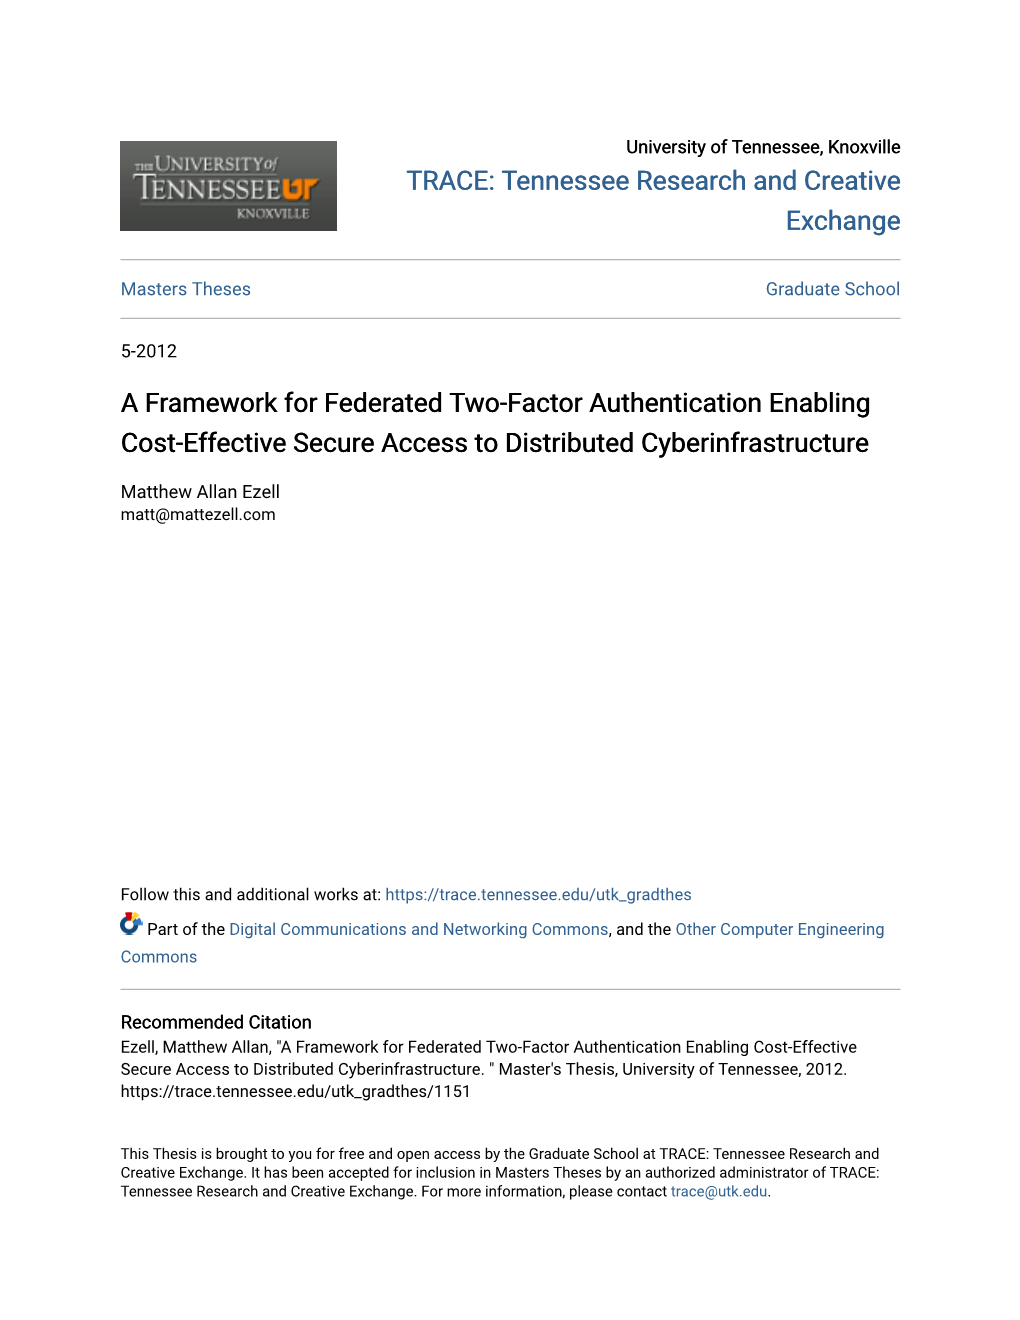 A Framework for Federated Two-Factor Authentication Enabling Cost-Effective Secure Access to Distributed Cyberinfrastructure